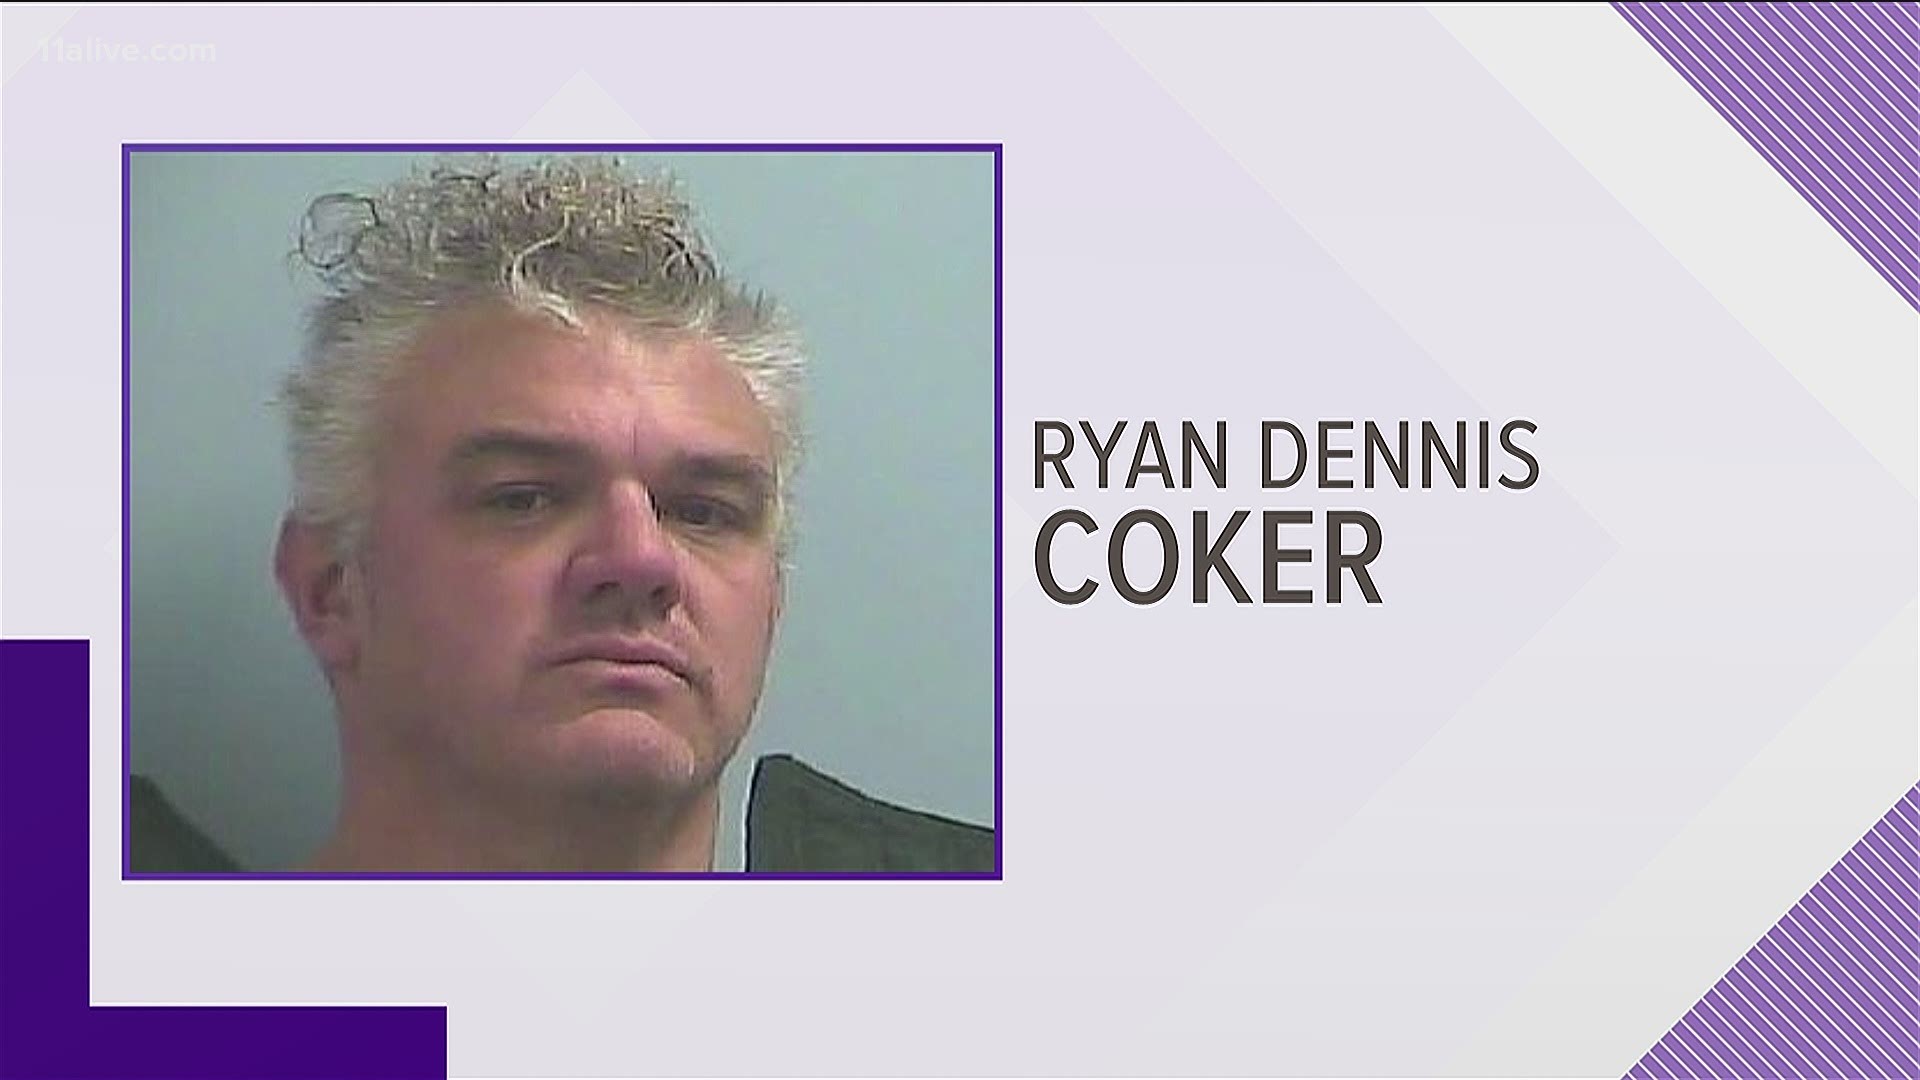 Ryan Dennis Coker, 38, is charged with six counts of sexual exploitation of children and unlawful eavesdropping.